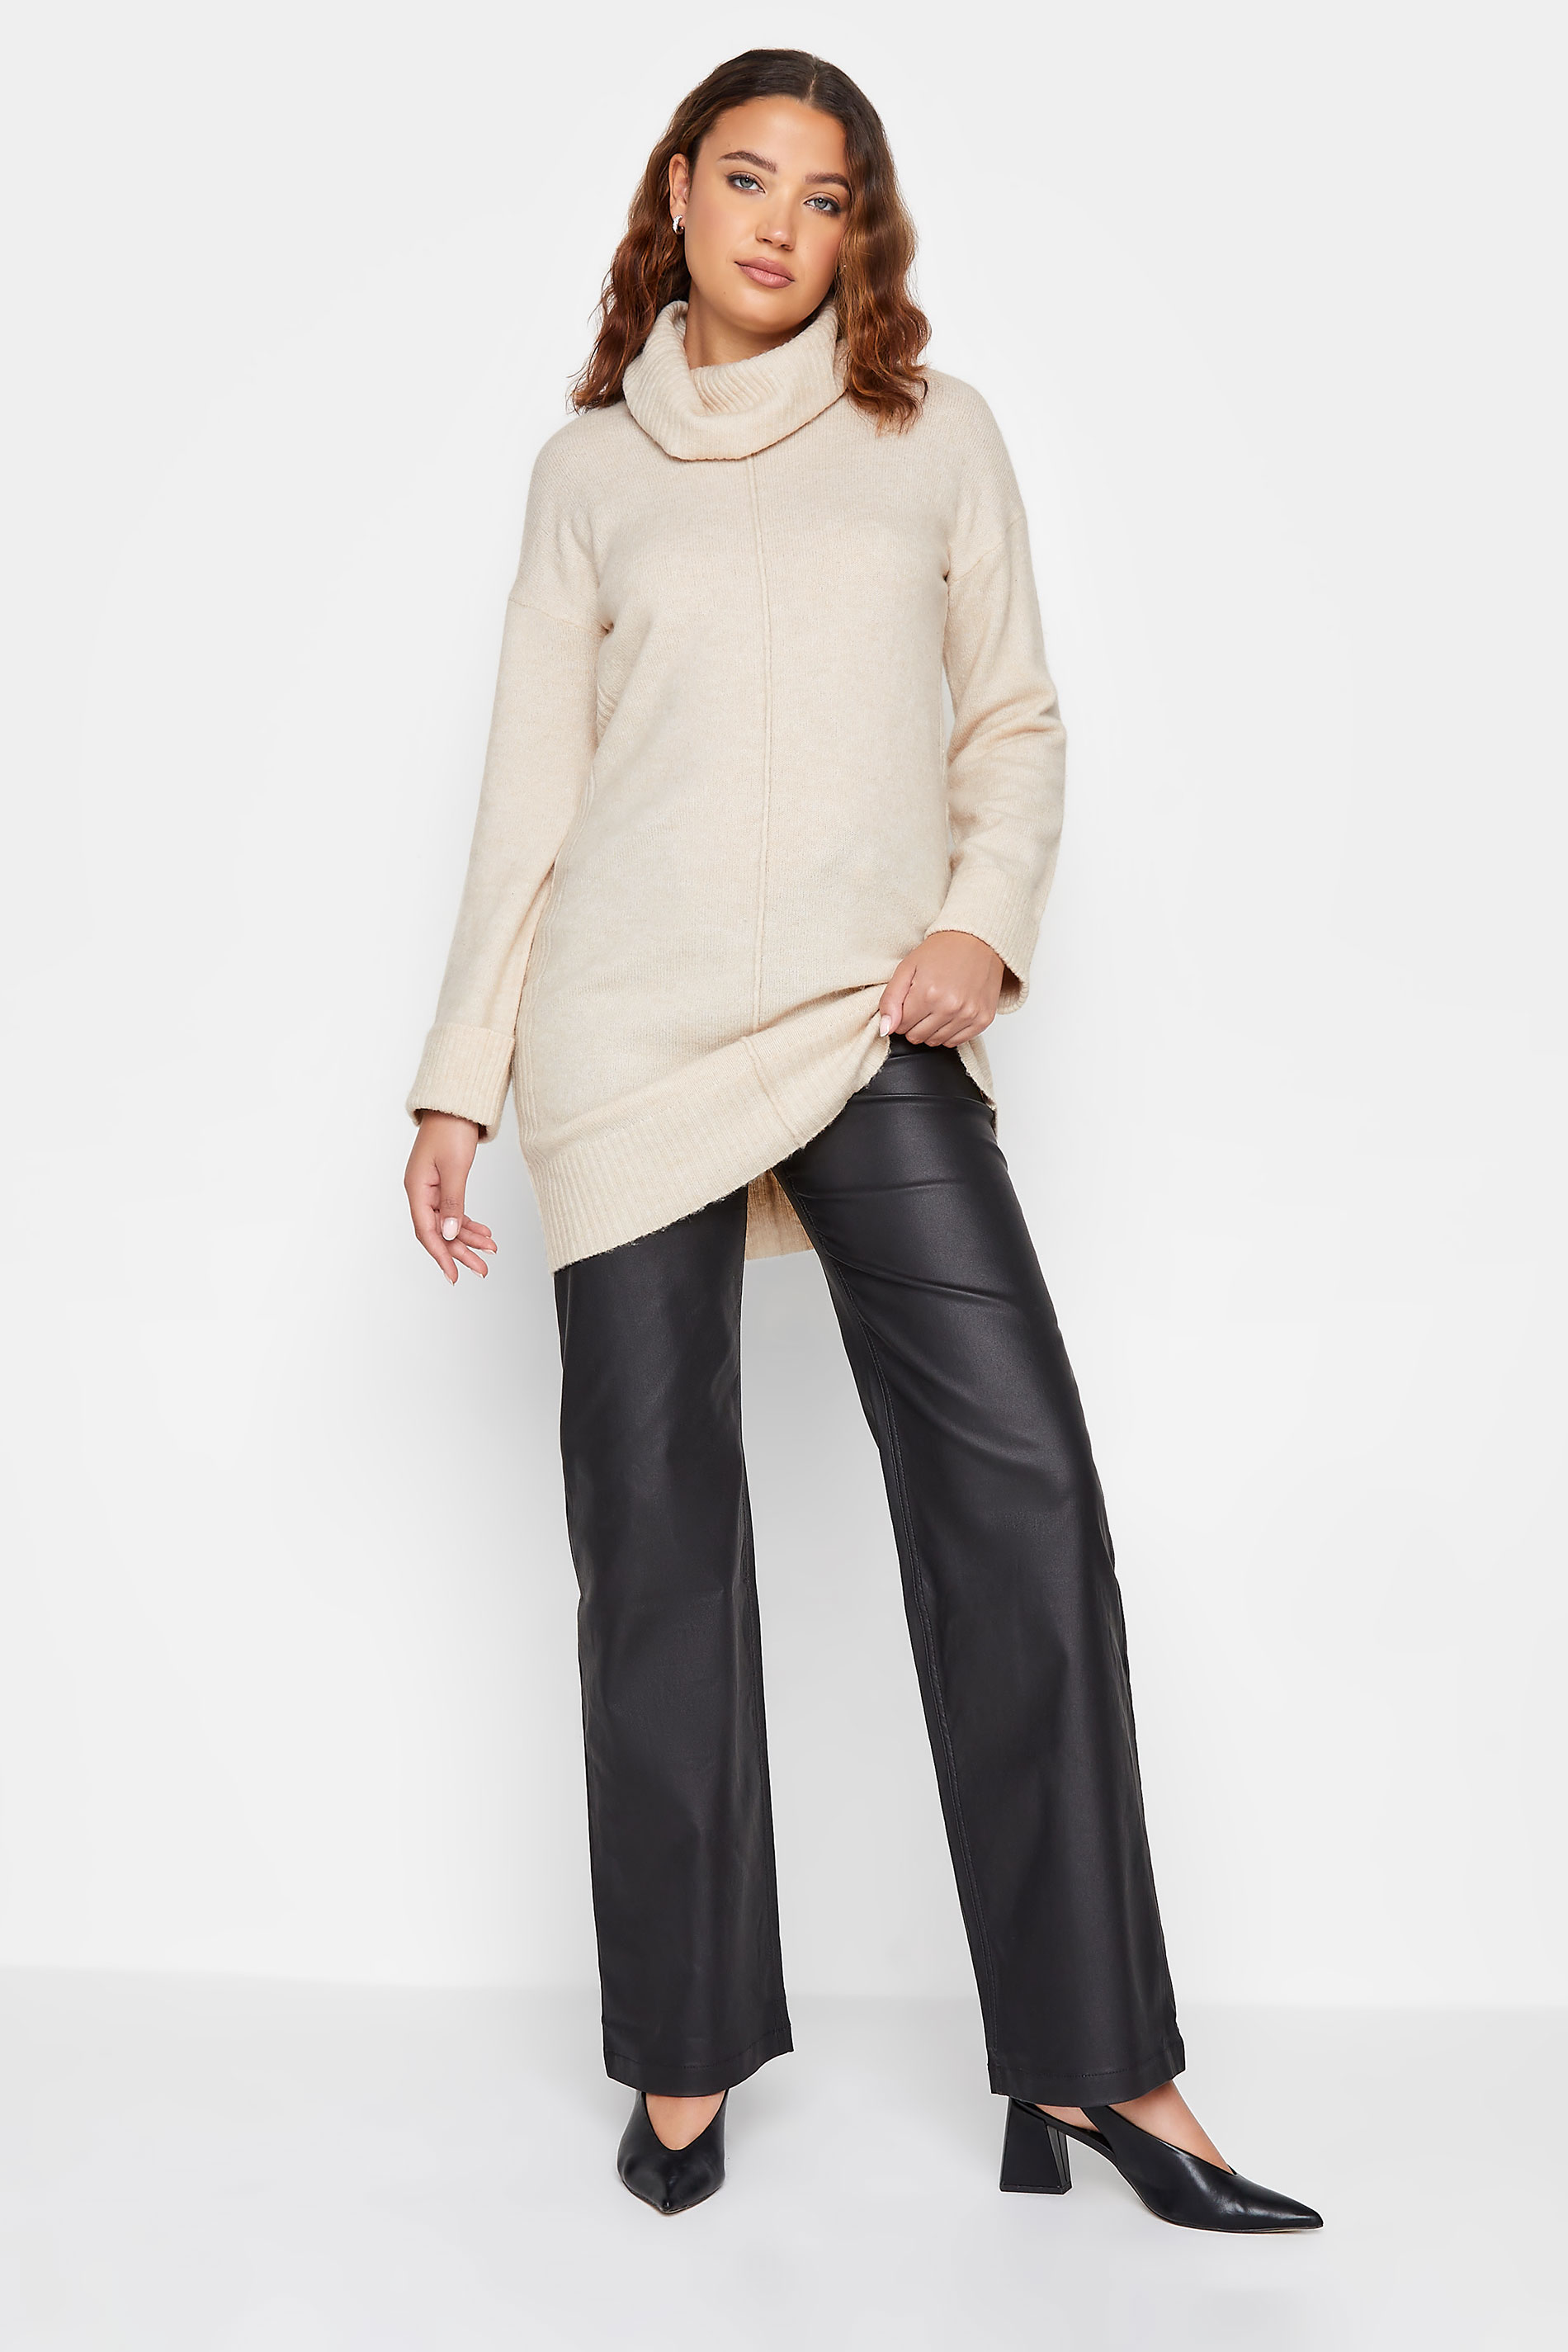 LTS Tall Ivory White Boxy Roll Neck Jumper | Long Tall Sally 2